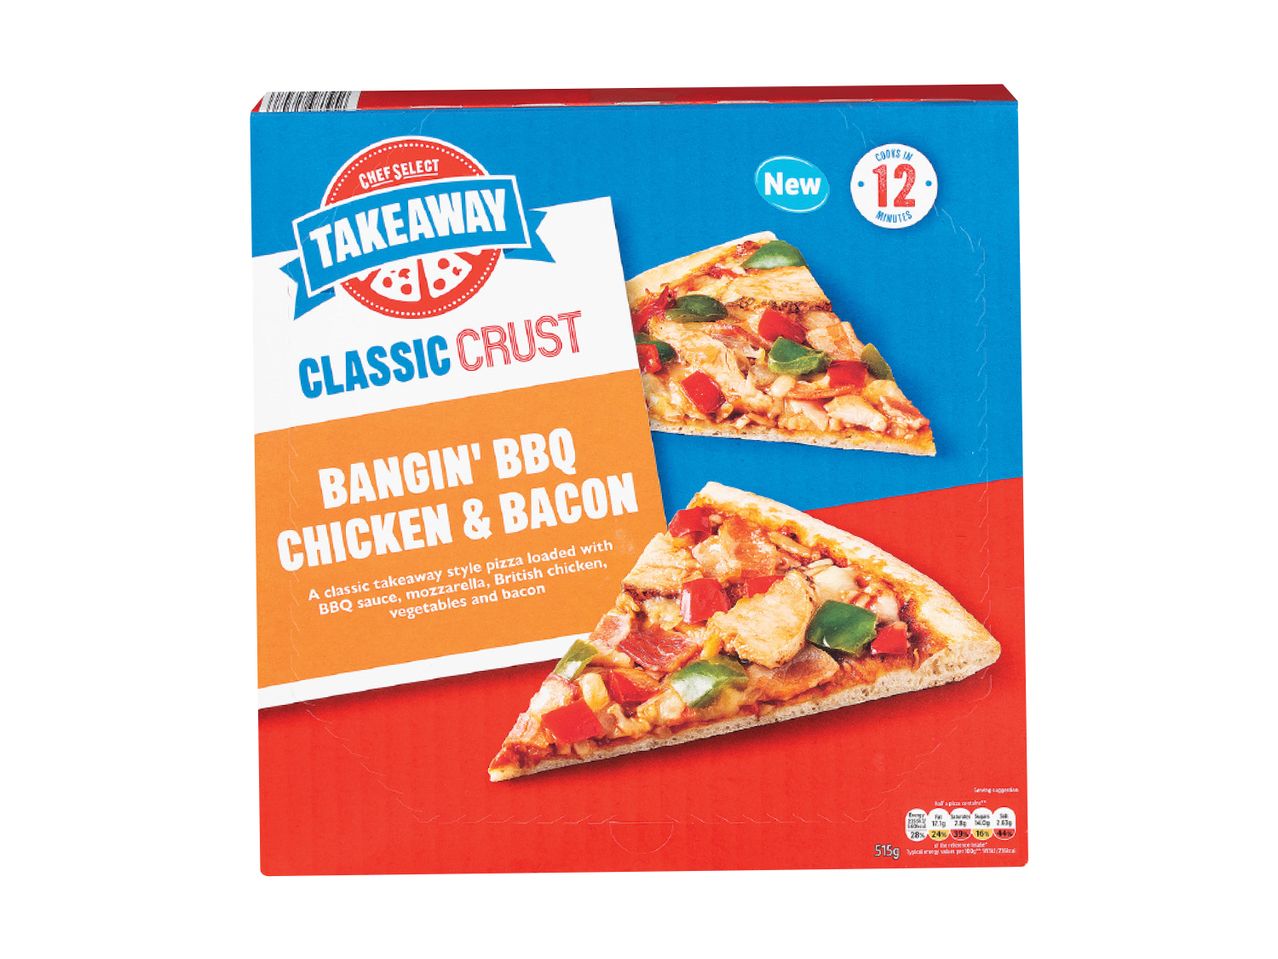 Go to full screen view: Chef Select Classic Crust BBQ Chicken and Bacon Pizza - Image 1